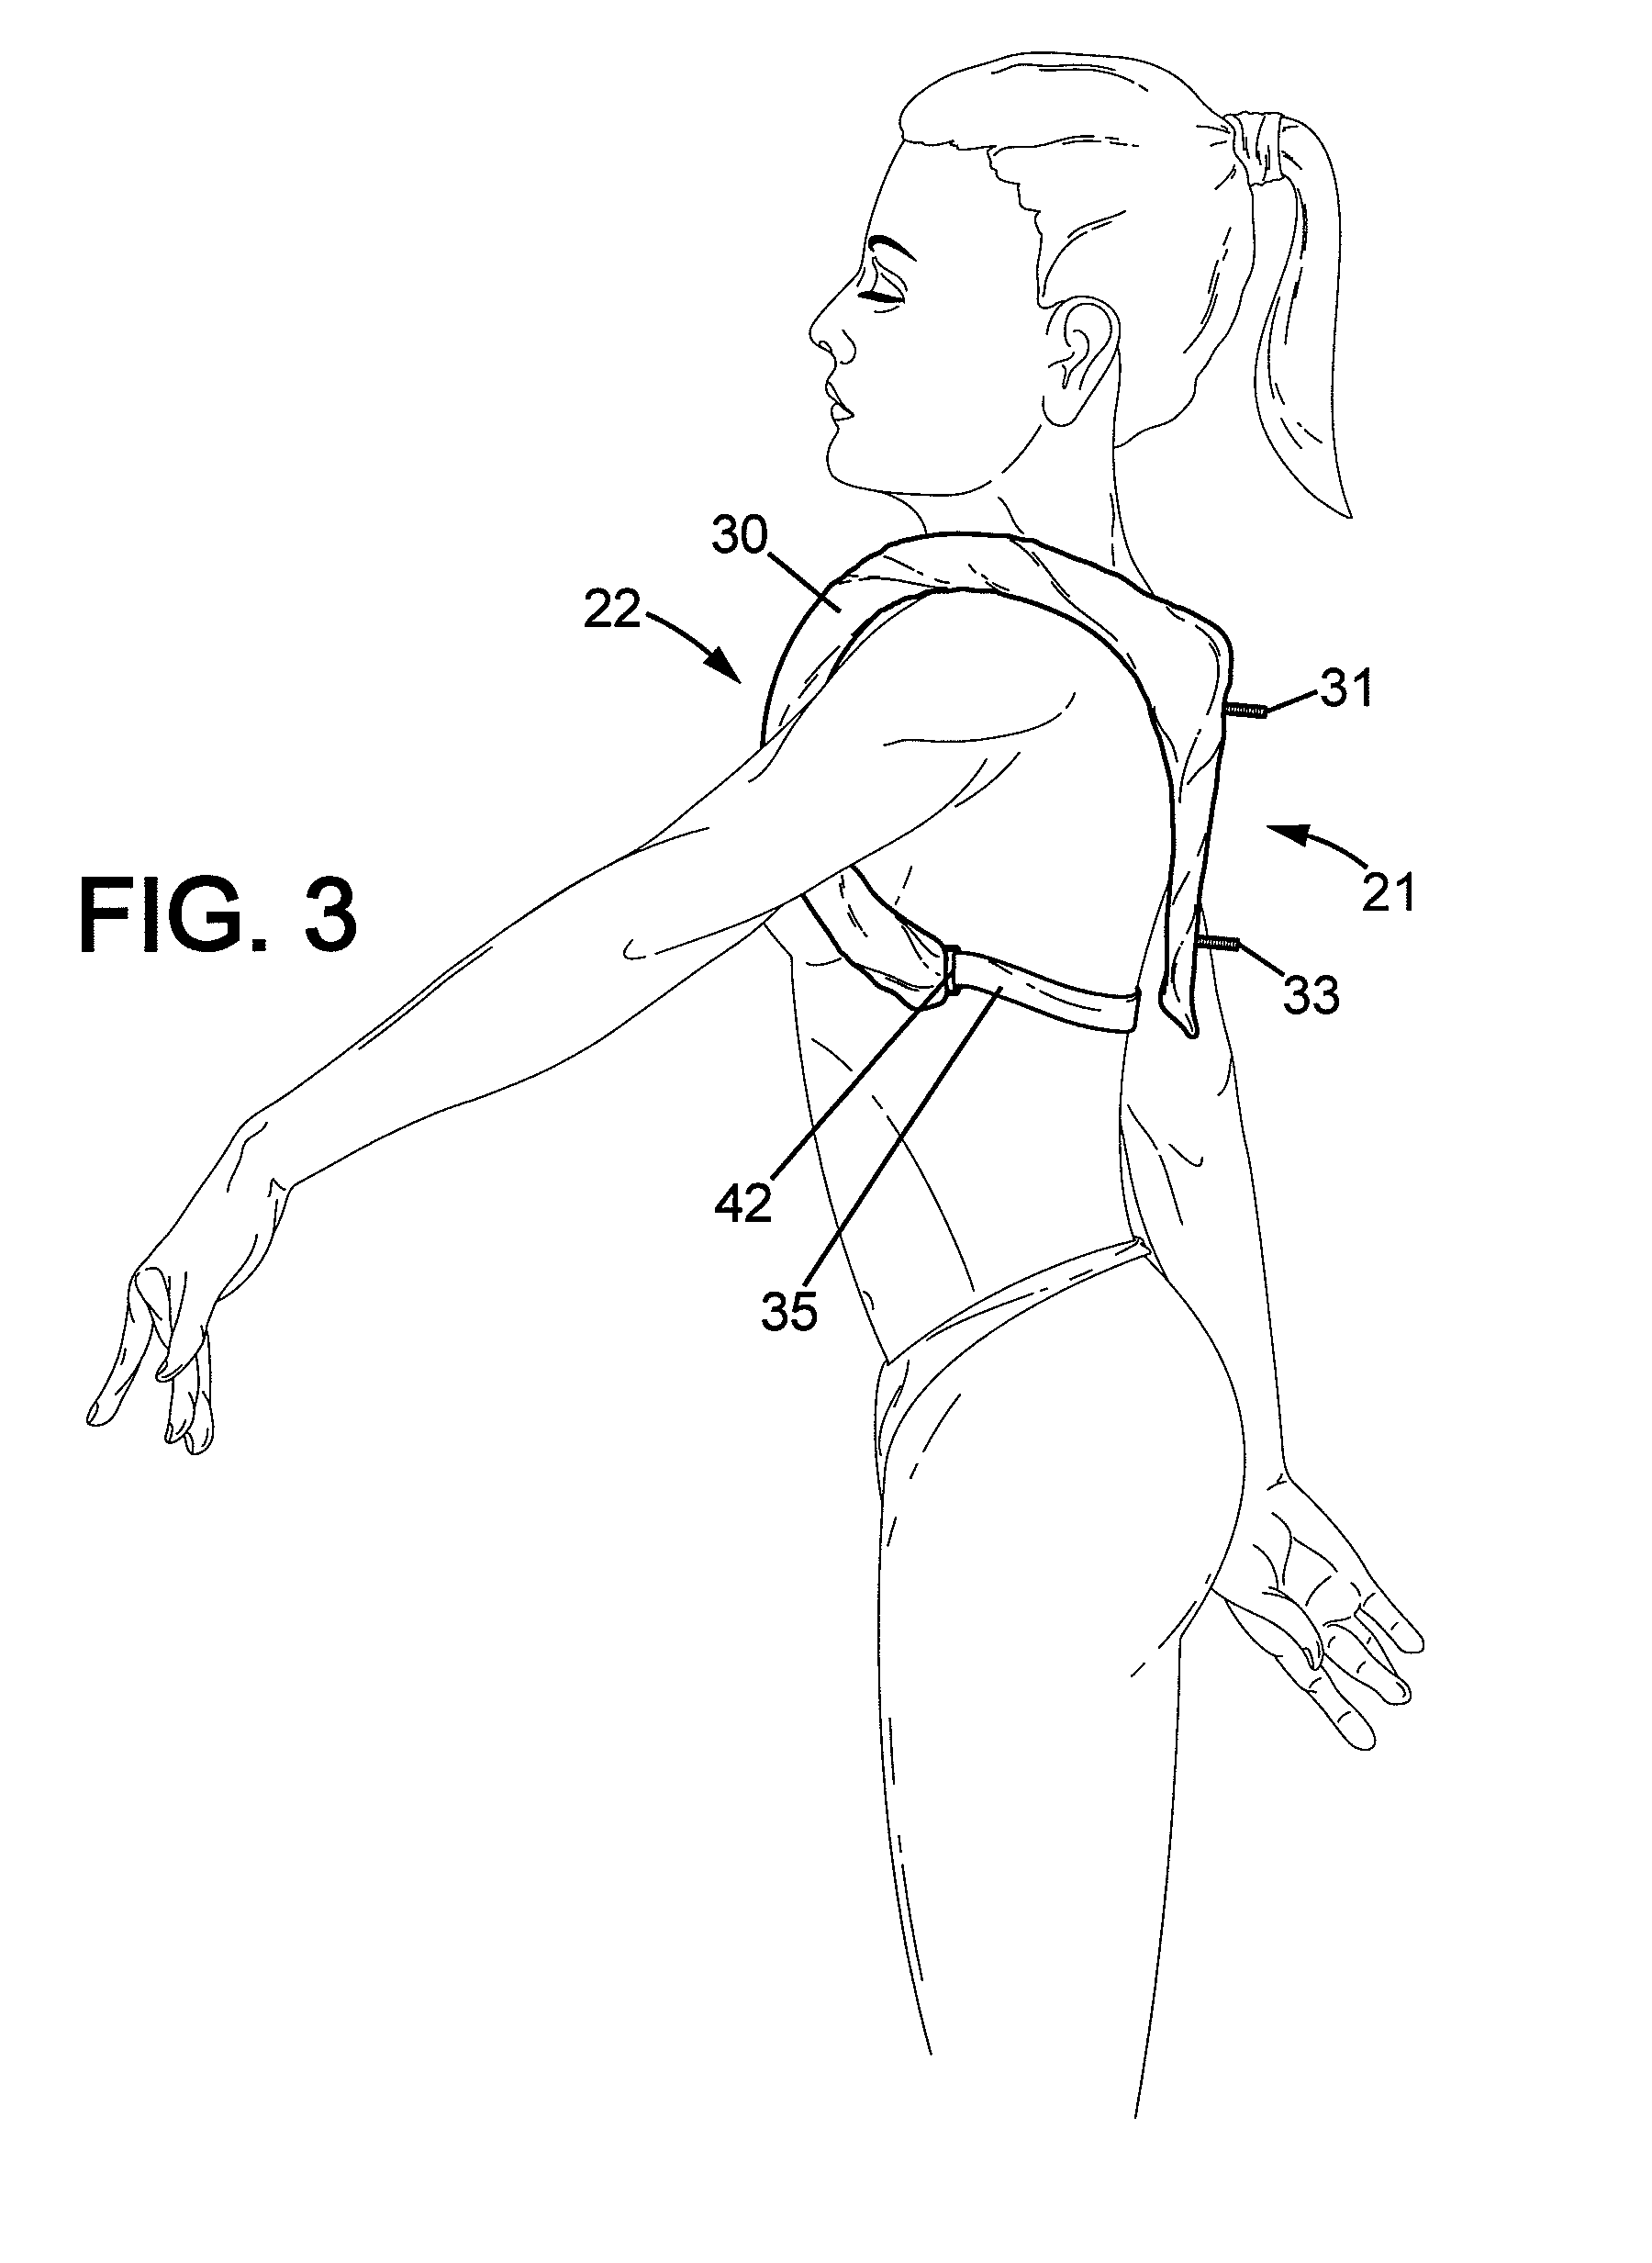 Prop-supporting harness for a stage performer